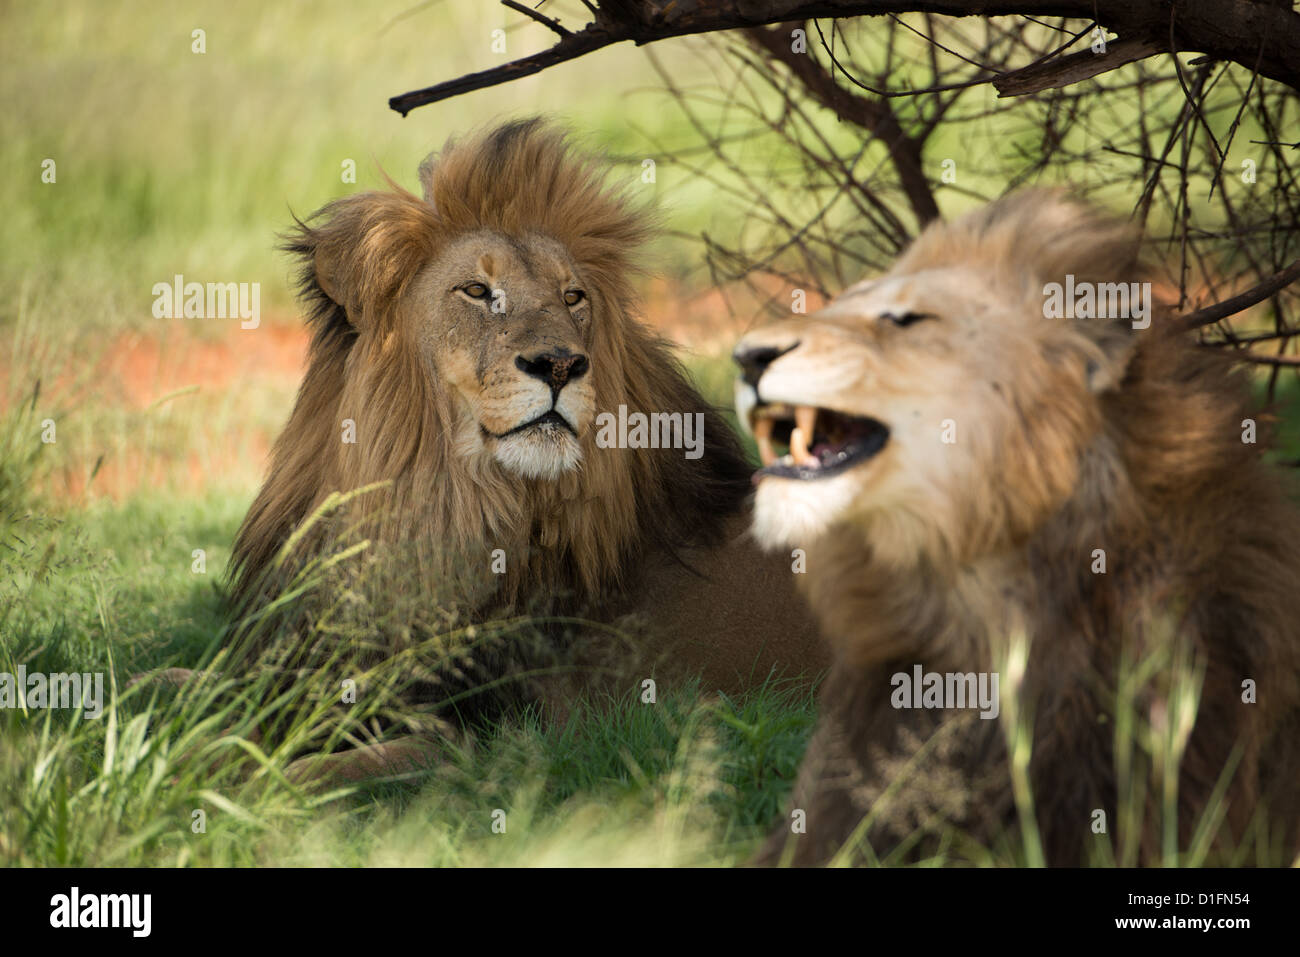 Two male lions relaxing, one growling Stock Photo